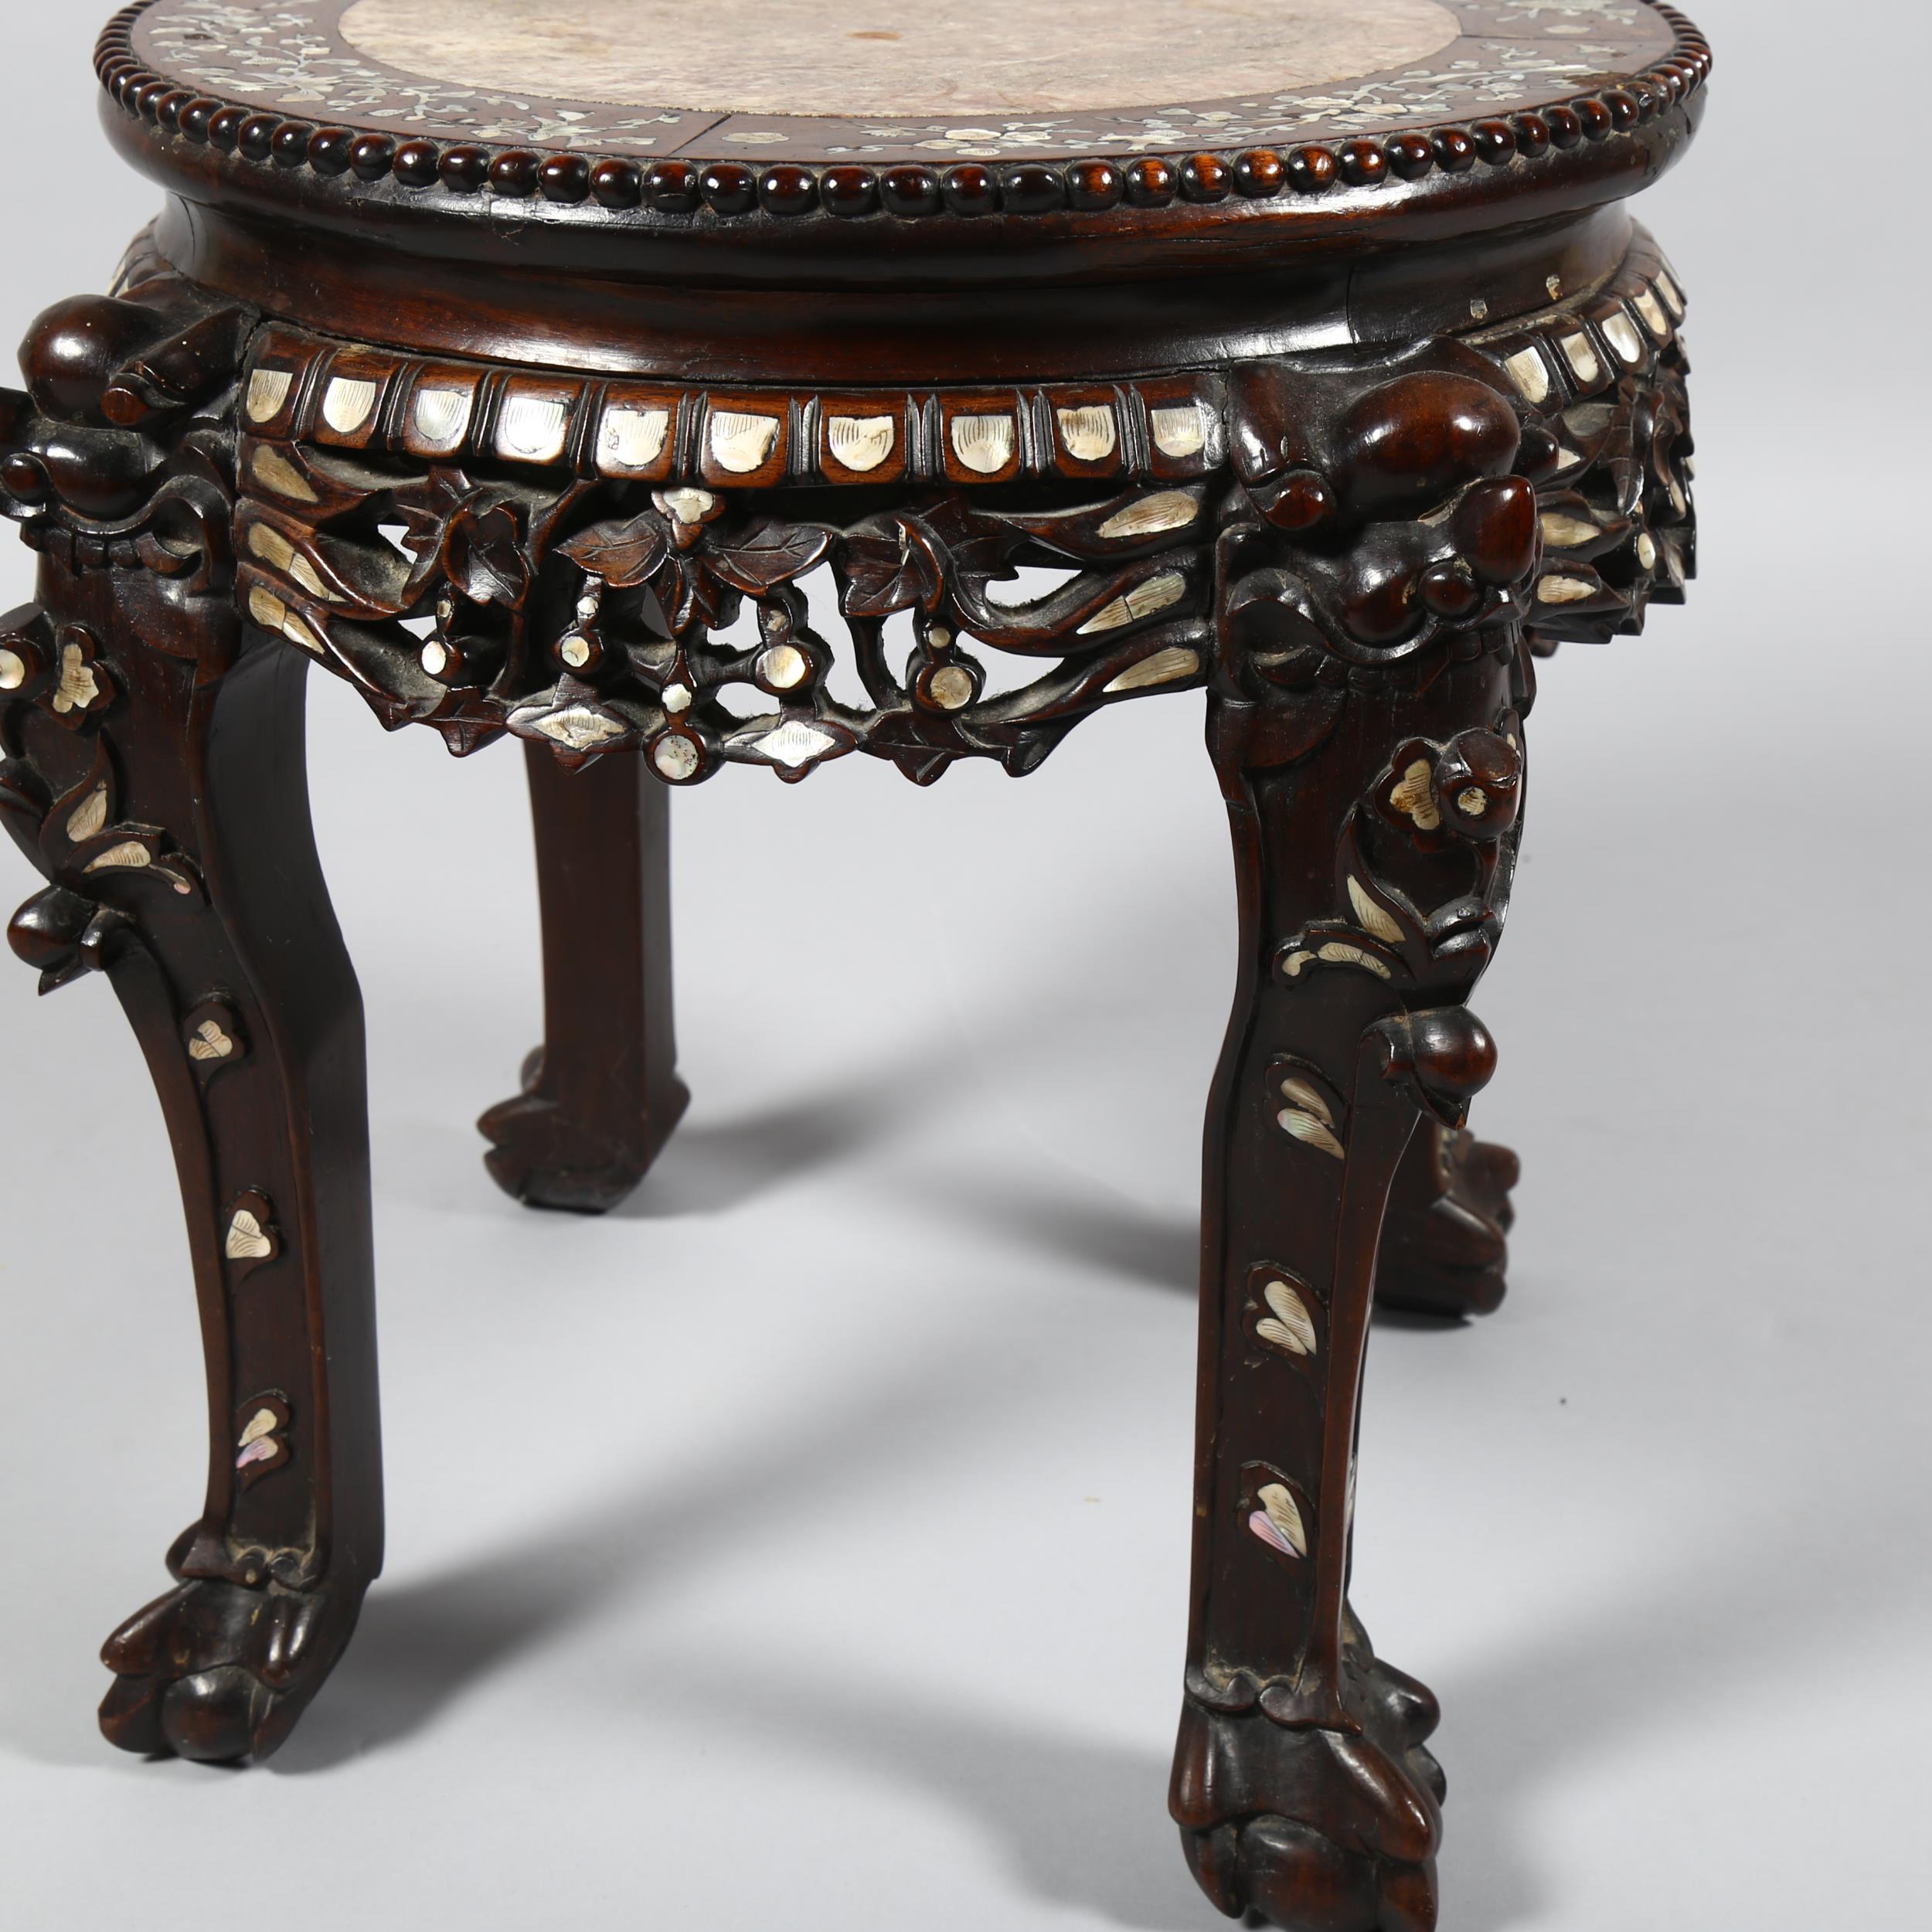 A 19th century Chinese hardwood and mother-of-pearl inlaid circular table, with inset marble top, - Image 5 of 6